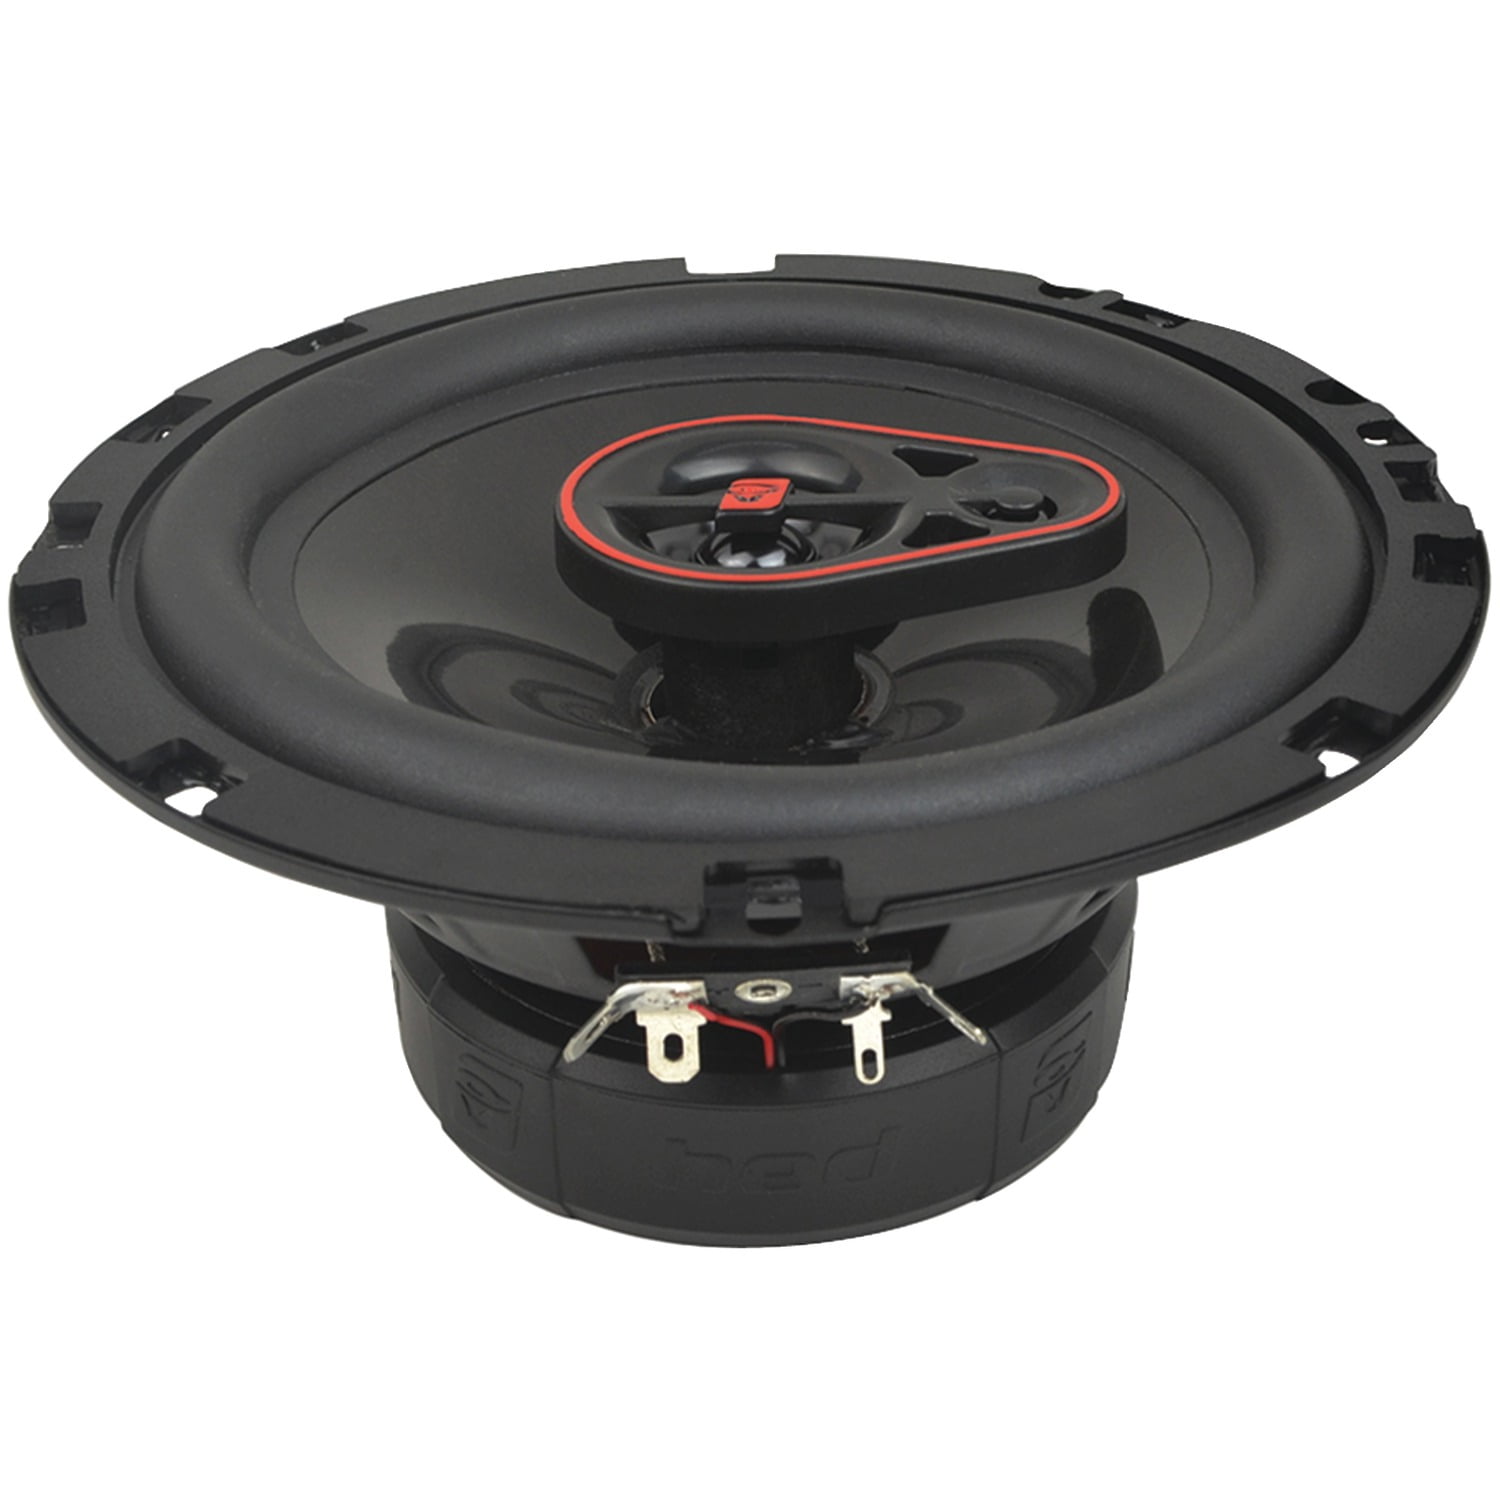 CERWIN-VEGA(R) MOBILE H7653 HED Series 3-Way Coaxial Speakers (6.5", 340  Watts max)